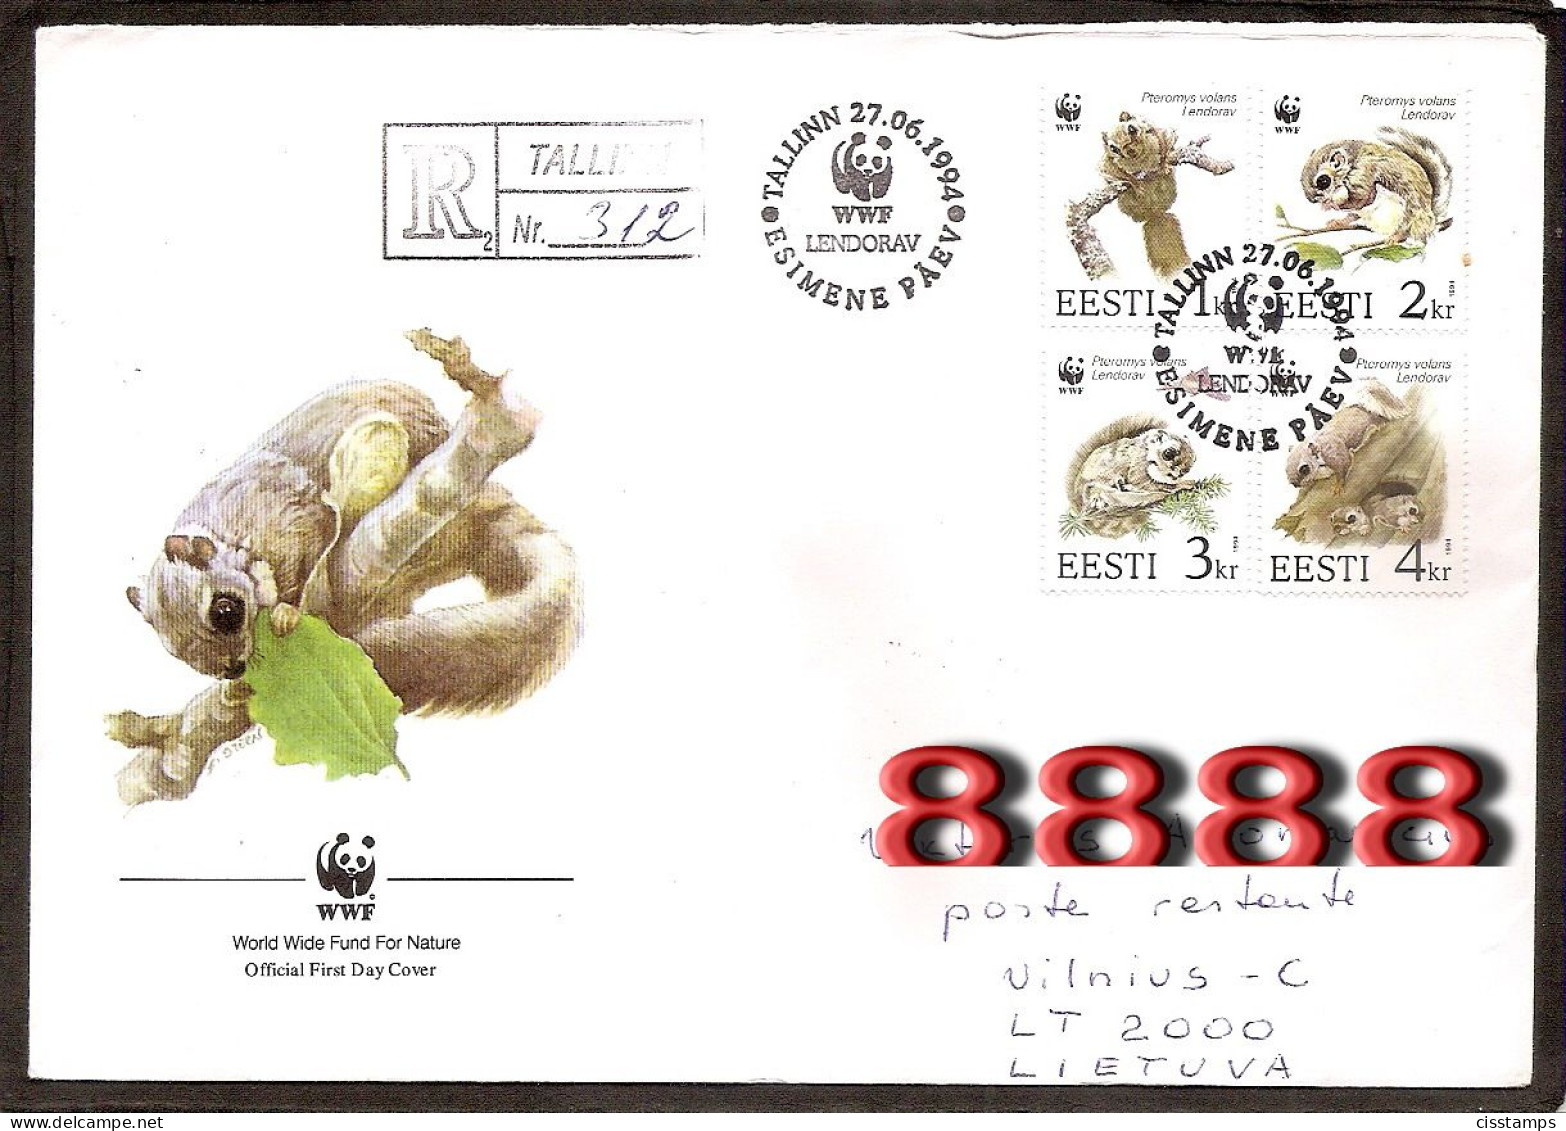 Estonia 1994●WWF Flying Squirrell●complet Set●Mi 229-32●FDC R-letter - FDC